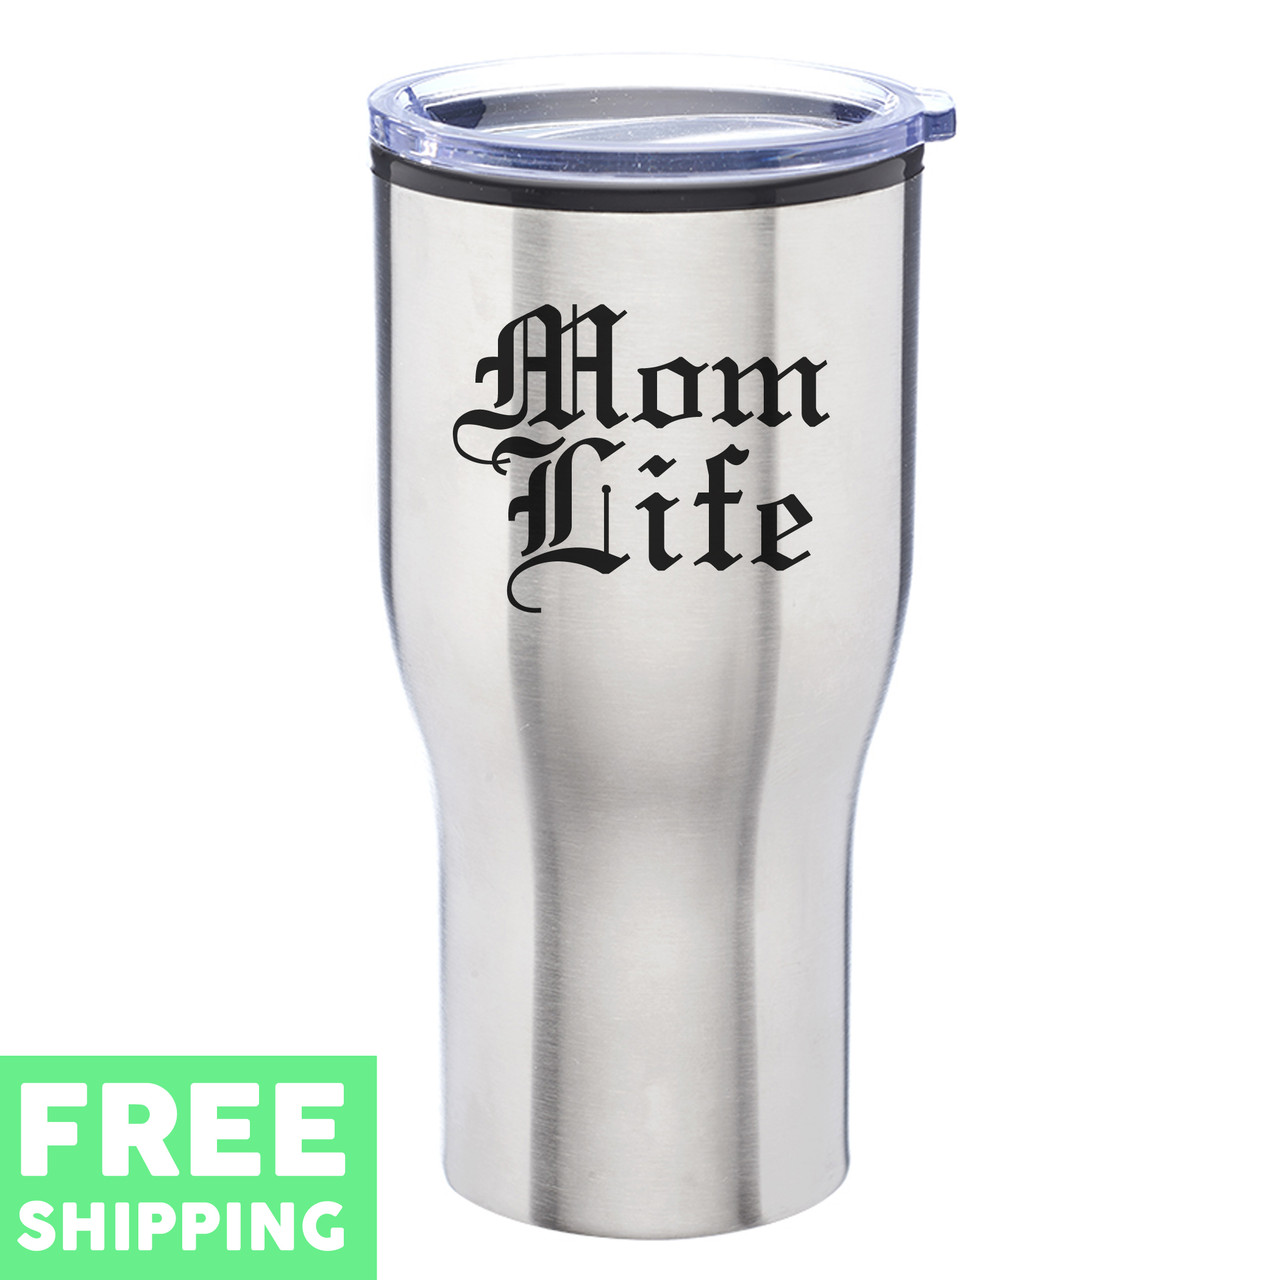 https://cdn11.bigcommerce.com/s-pza6oiin/images/stencil/1280x1280/products/9897/17256/momlife_28_oz_Challenger_Stainless_Steel_Travel_Mugs_silver_3549_freeshipping__39222.1587578317.jpg?c=2?imbypass=on